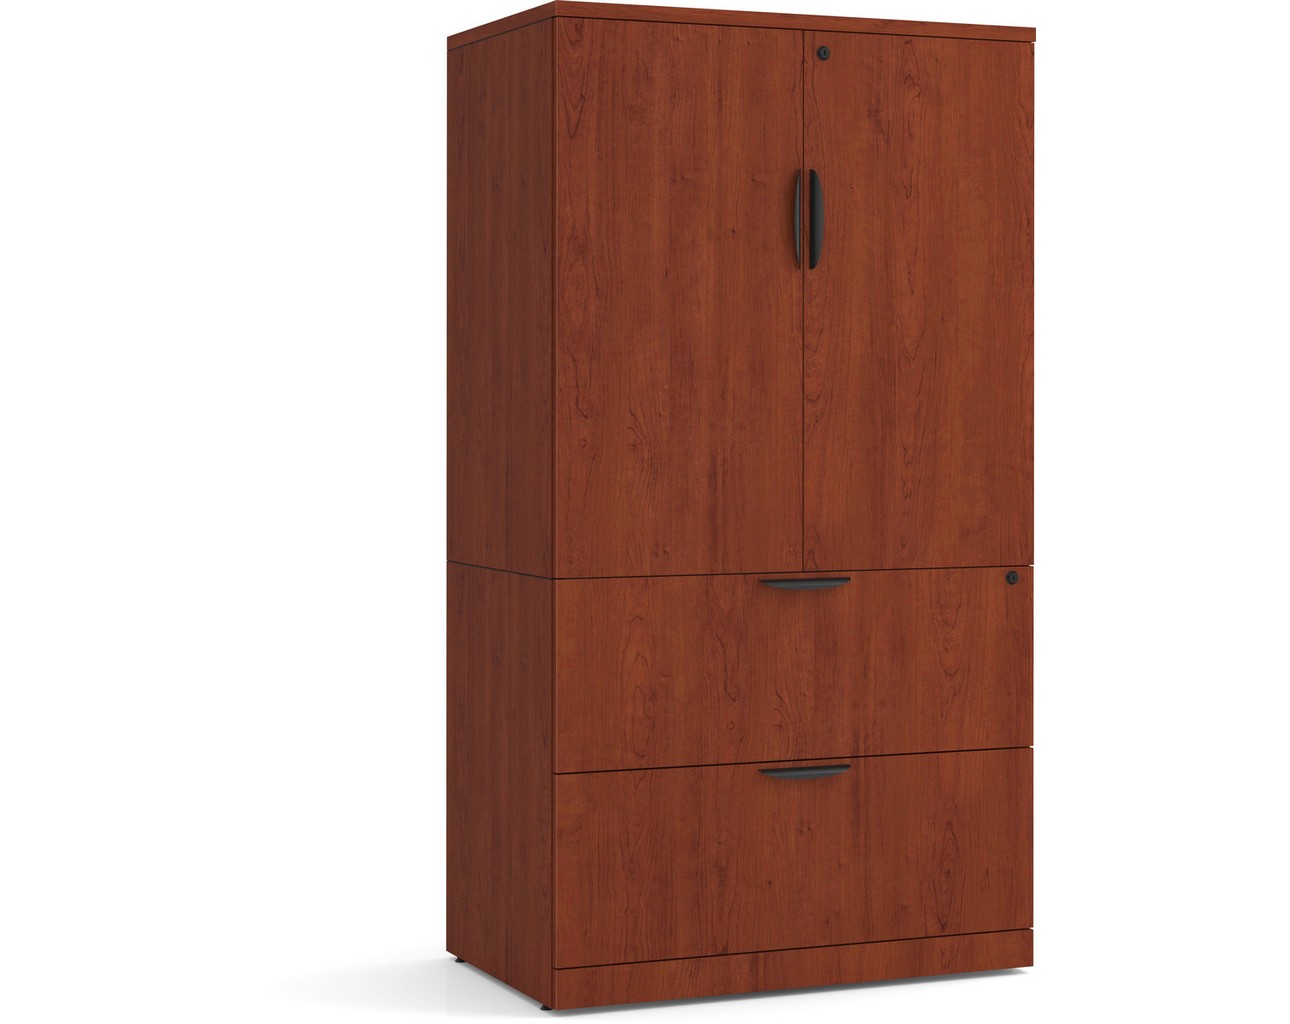 Locking Storage Cabinet and Lateral File Combo Unit – Cherry